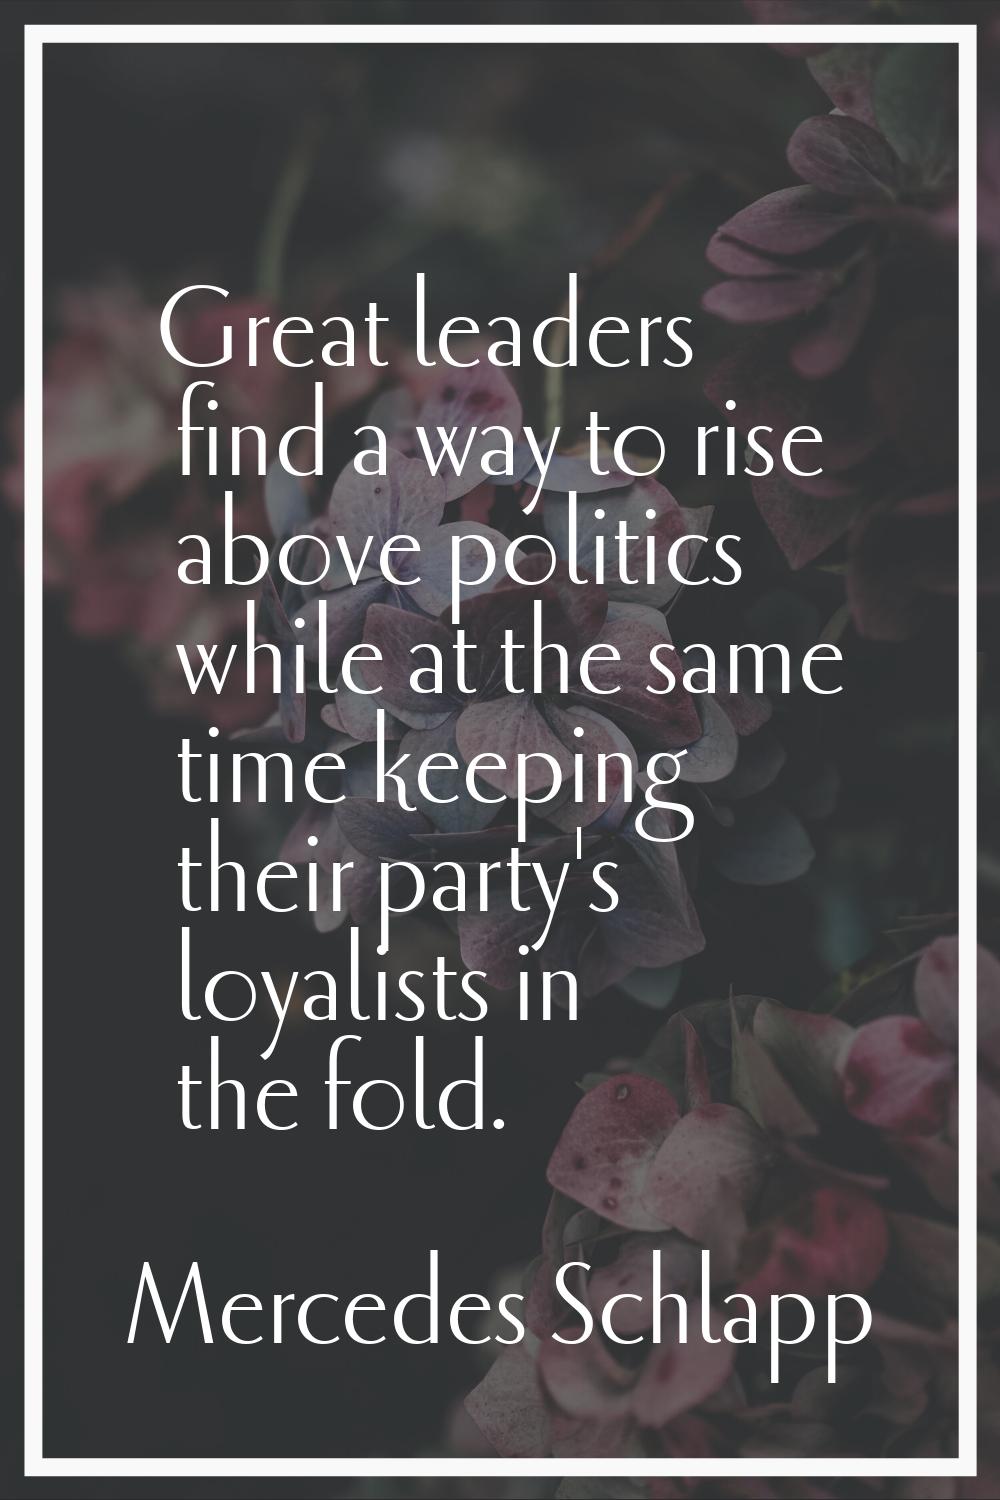 Great leaders find a way to rise above politics while at the same time keeping their party's loyali